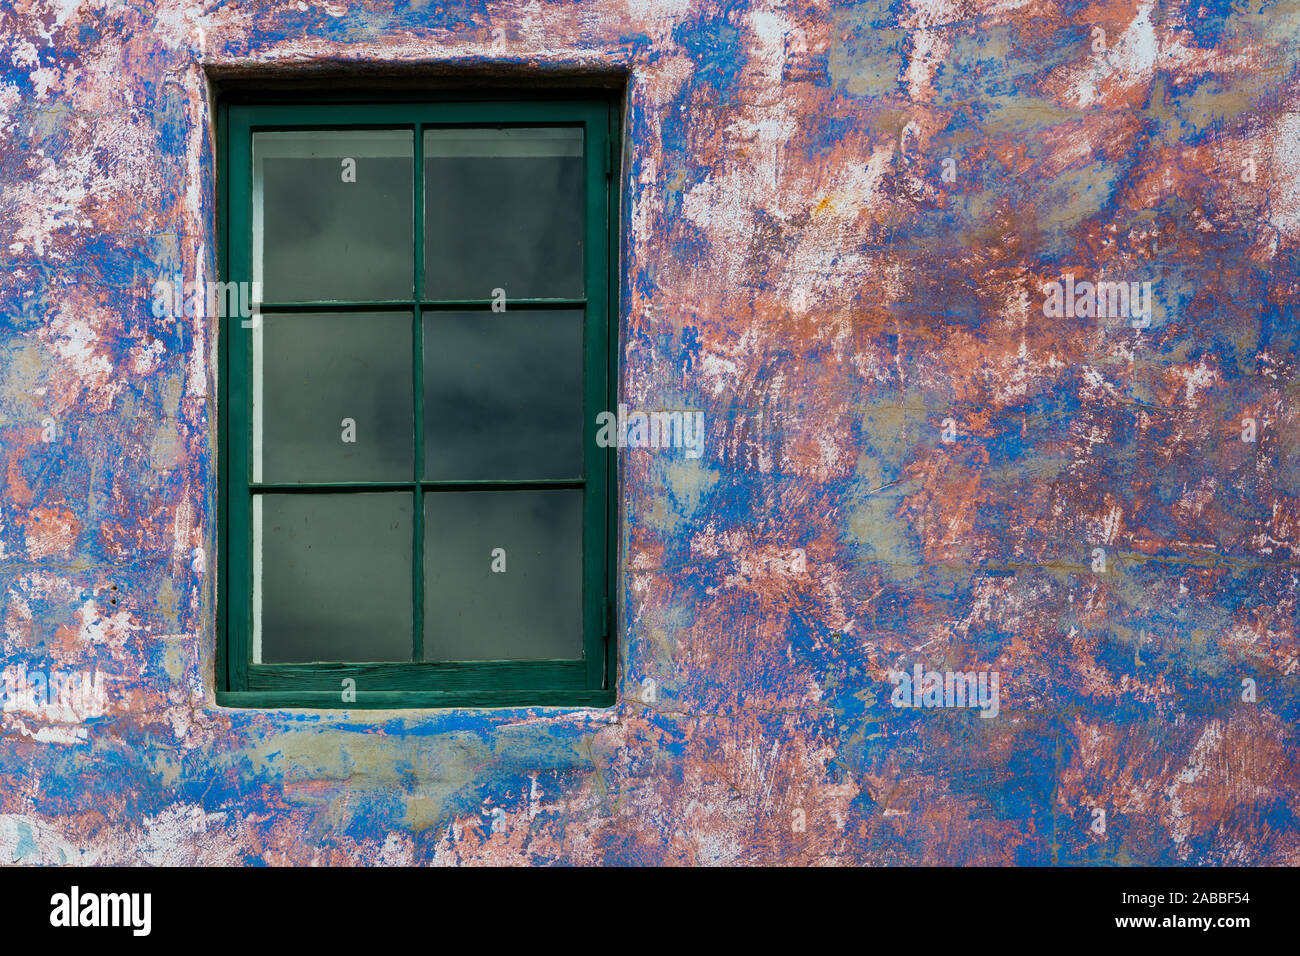 Window with green wood trim set in a weathered plaster wall with a distressed paint style in vibrant colors of blue, purple, and pink Stock Photo